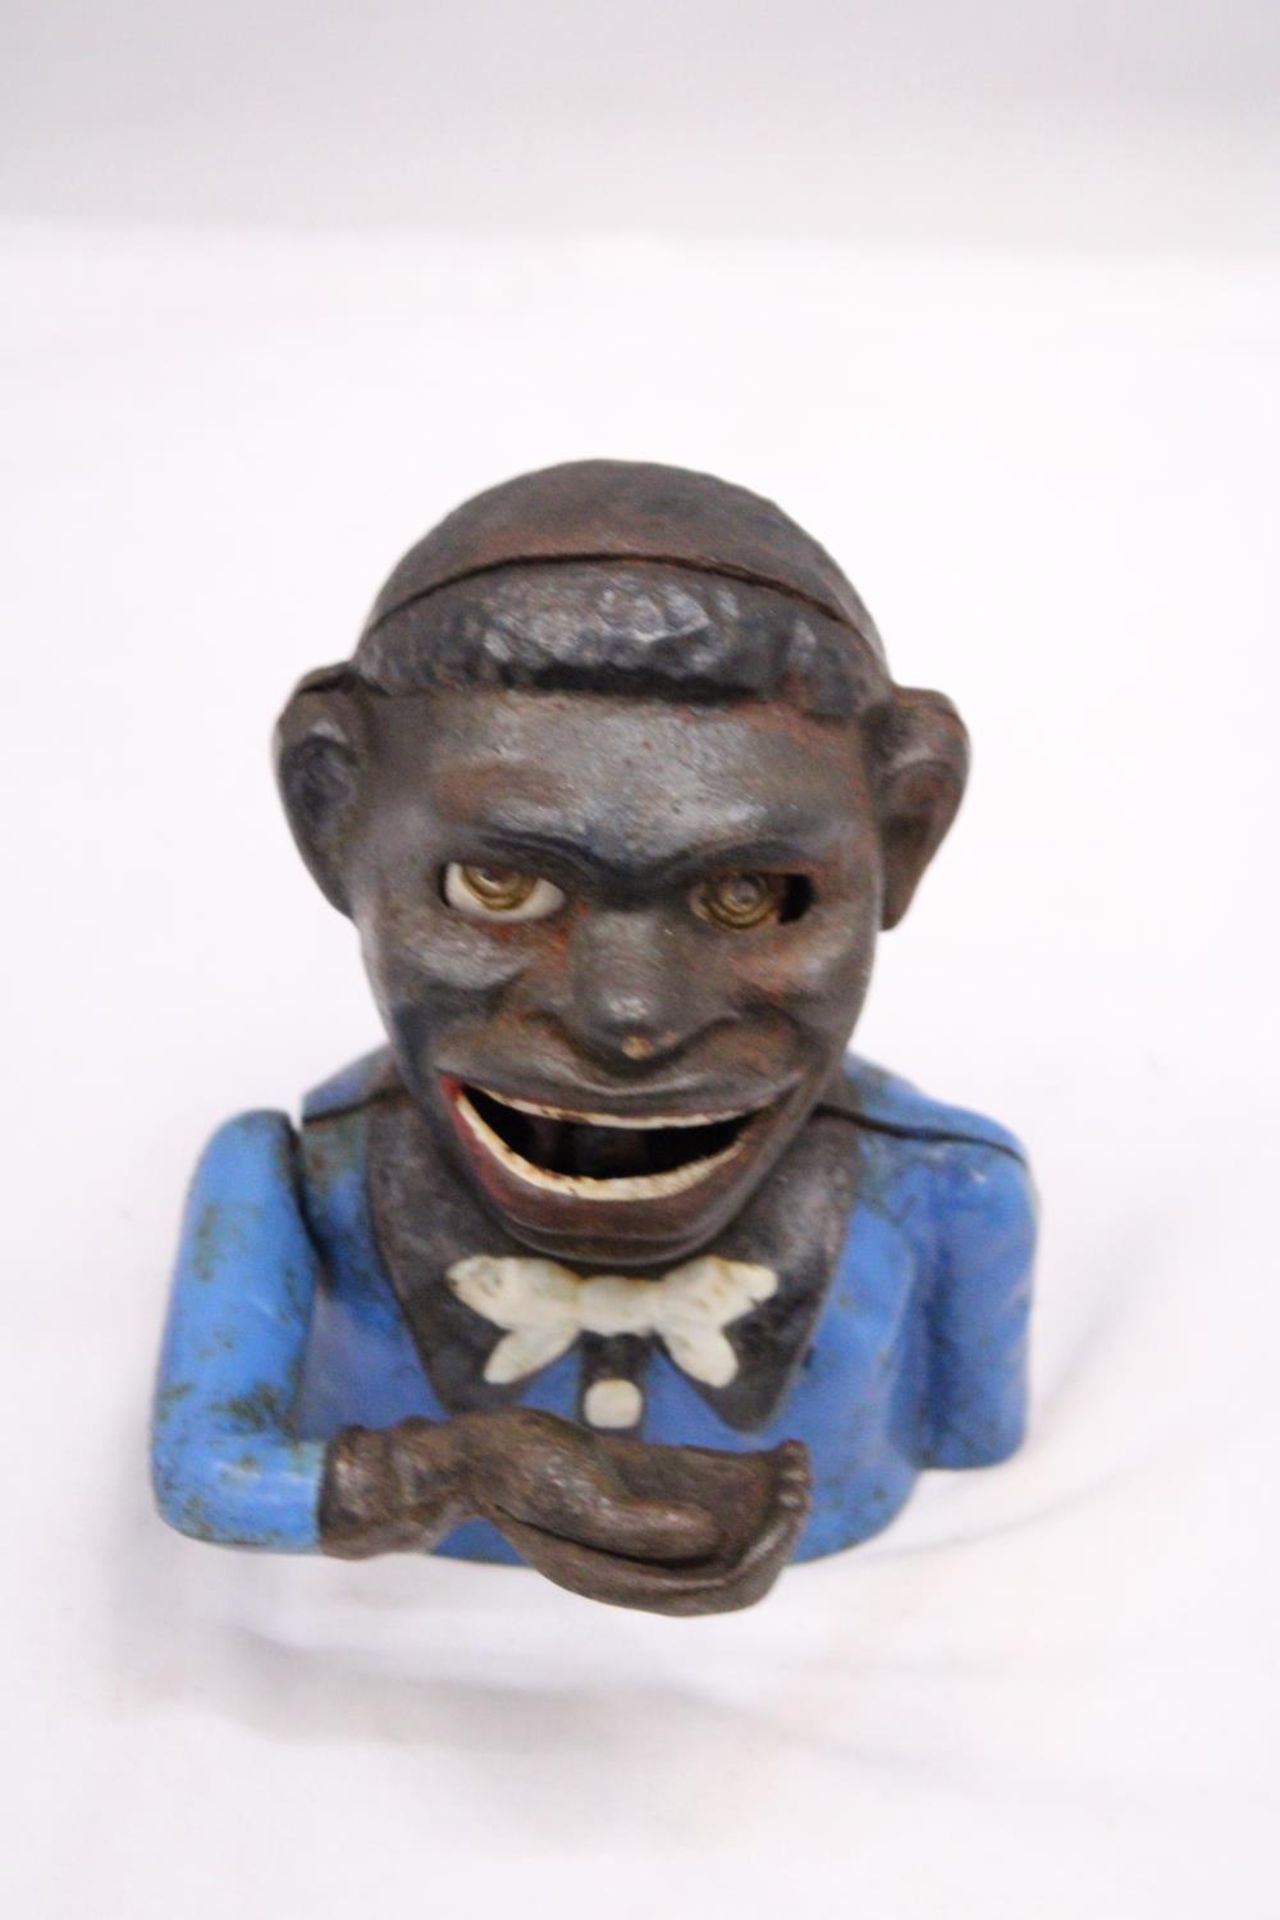 A VINTAGE CAST IRON AFRICAN AMERICAN MECHANICAL BANK - Image 5 of 5